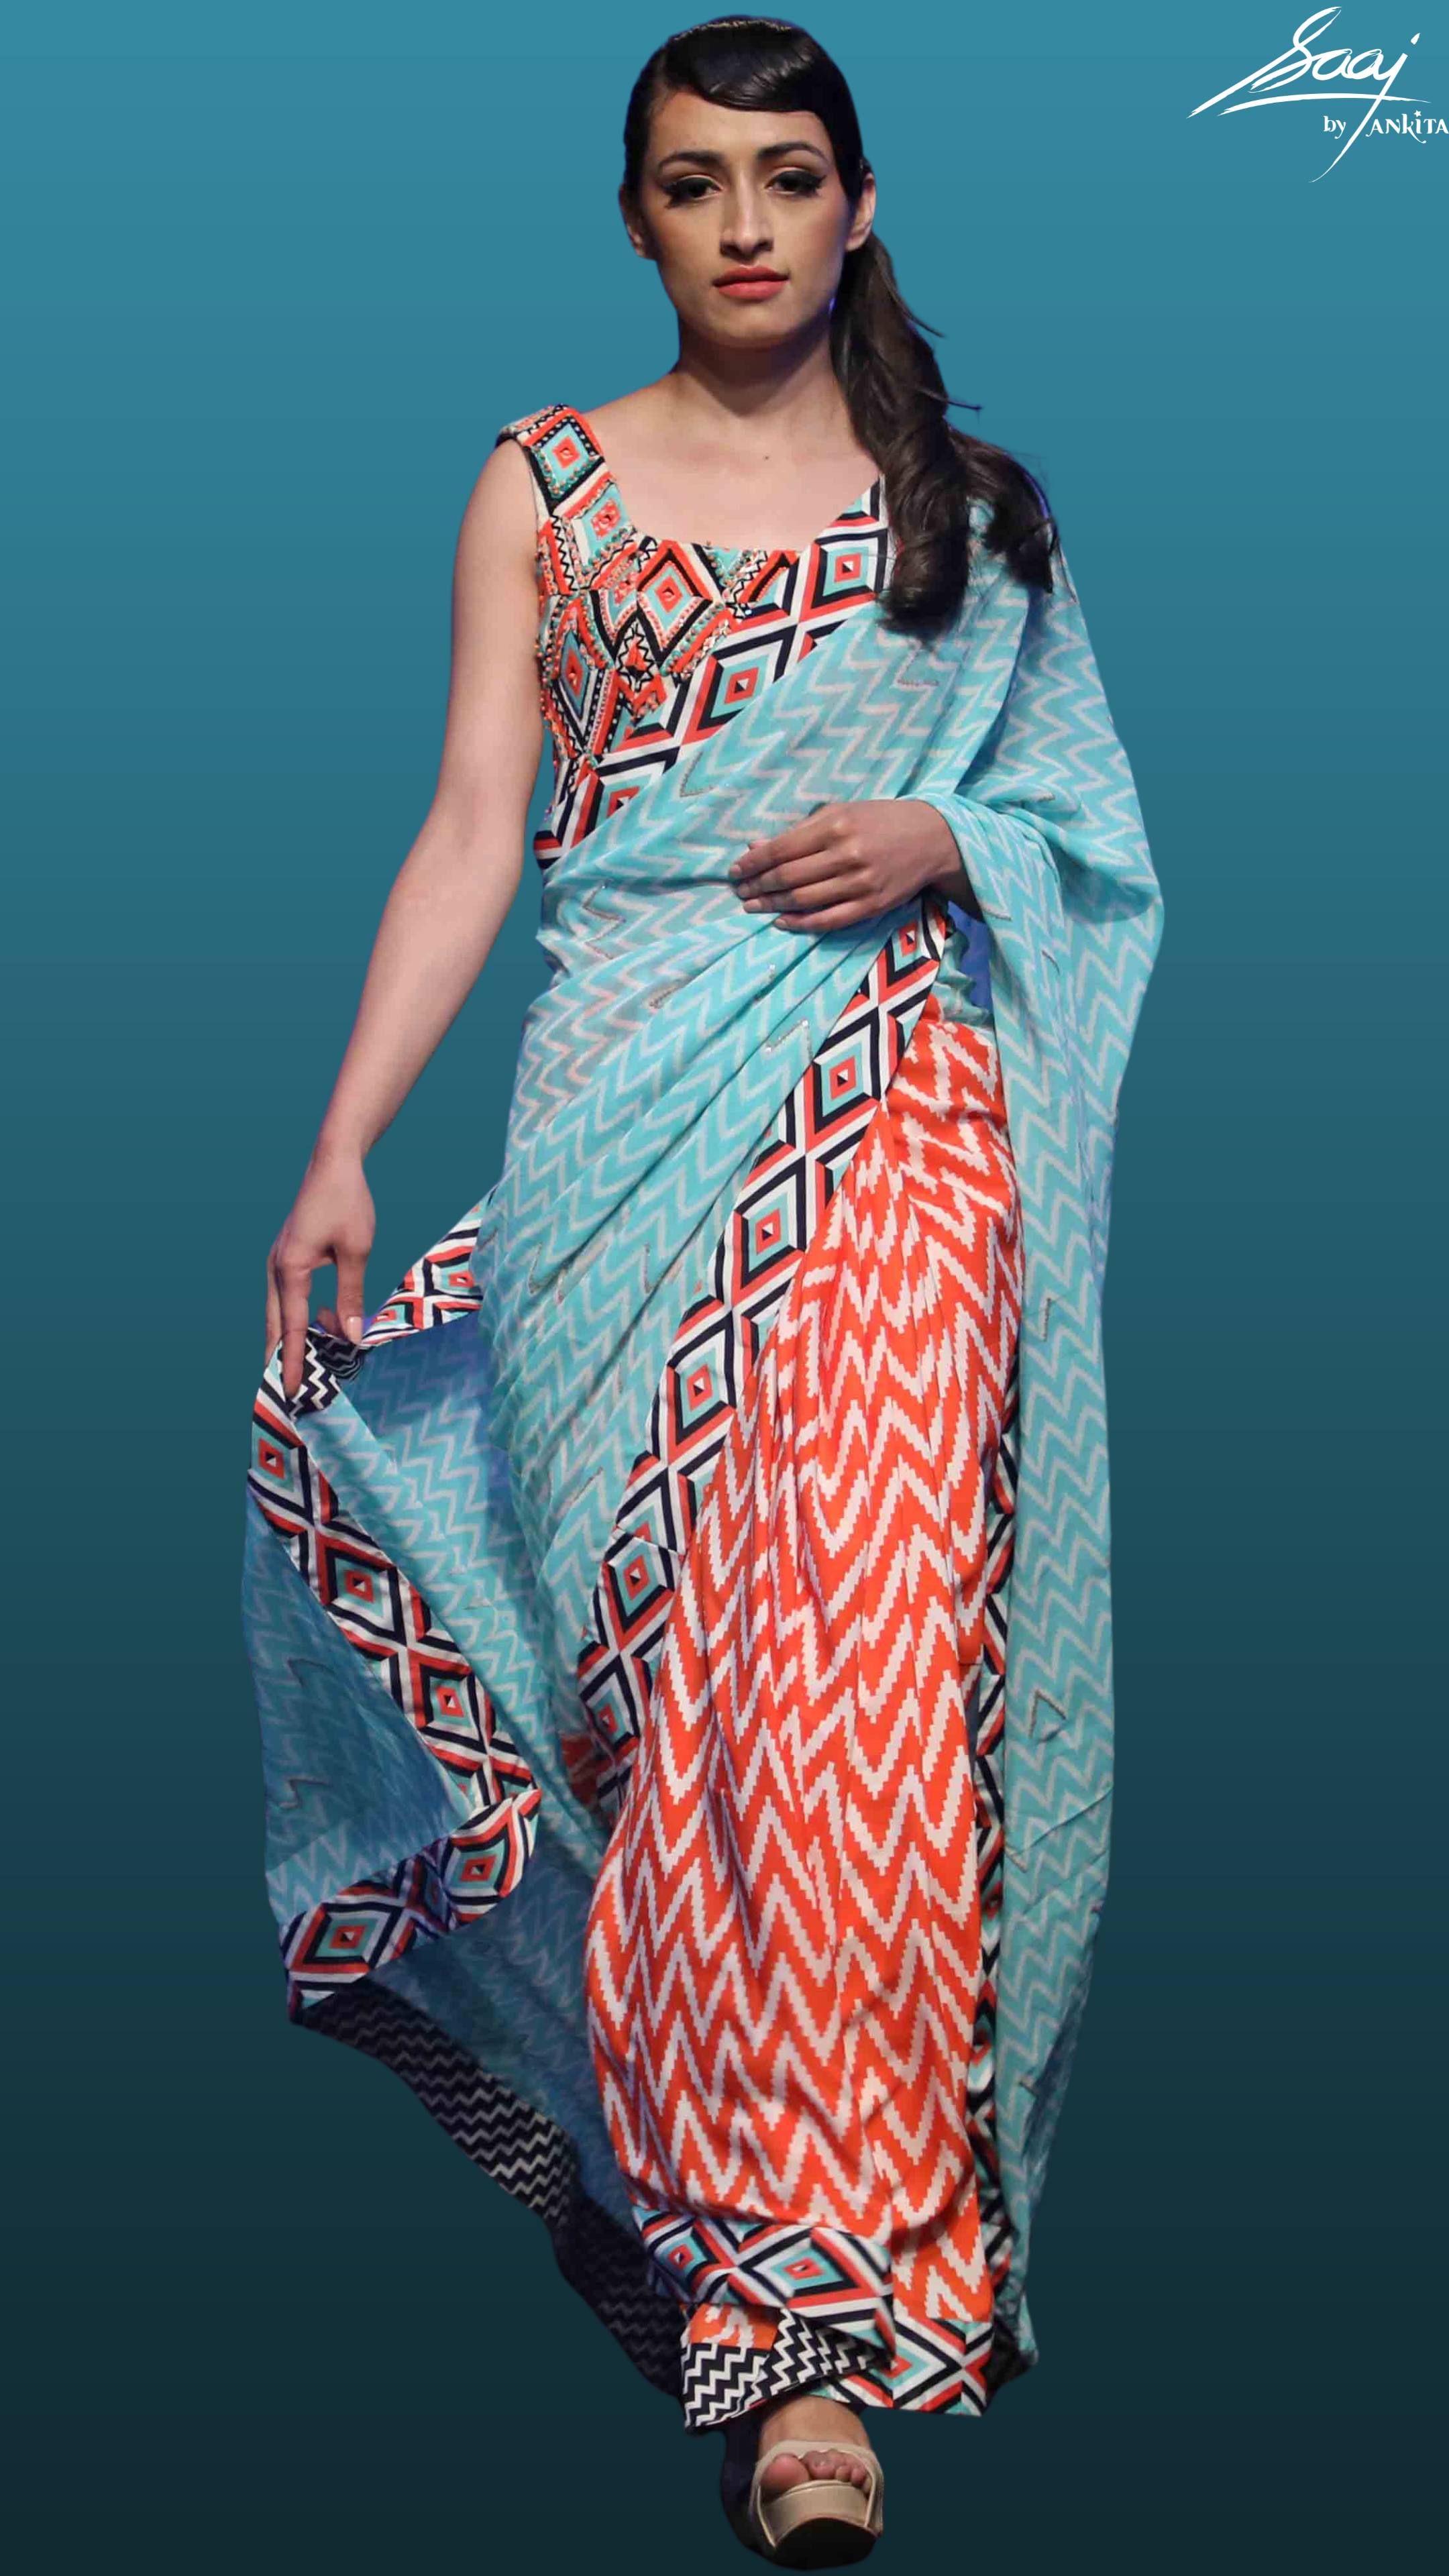 Printed Crepe and Georgette Saree teamed with Handwoven Blouse - Saaj By Ankita